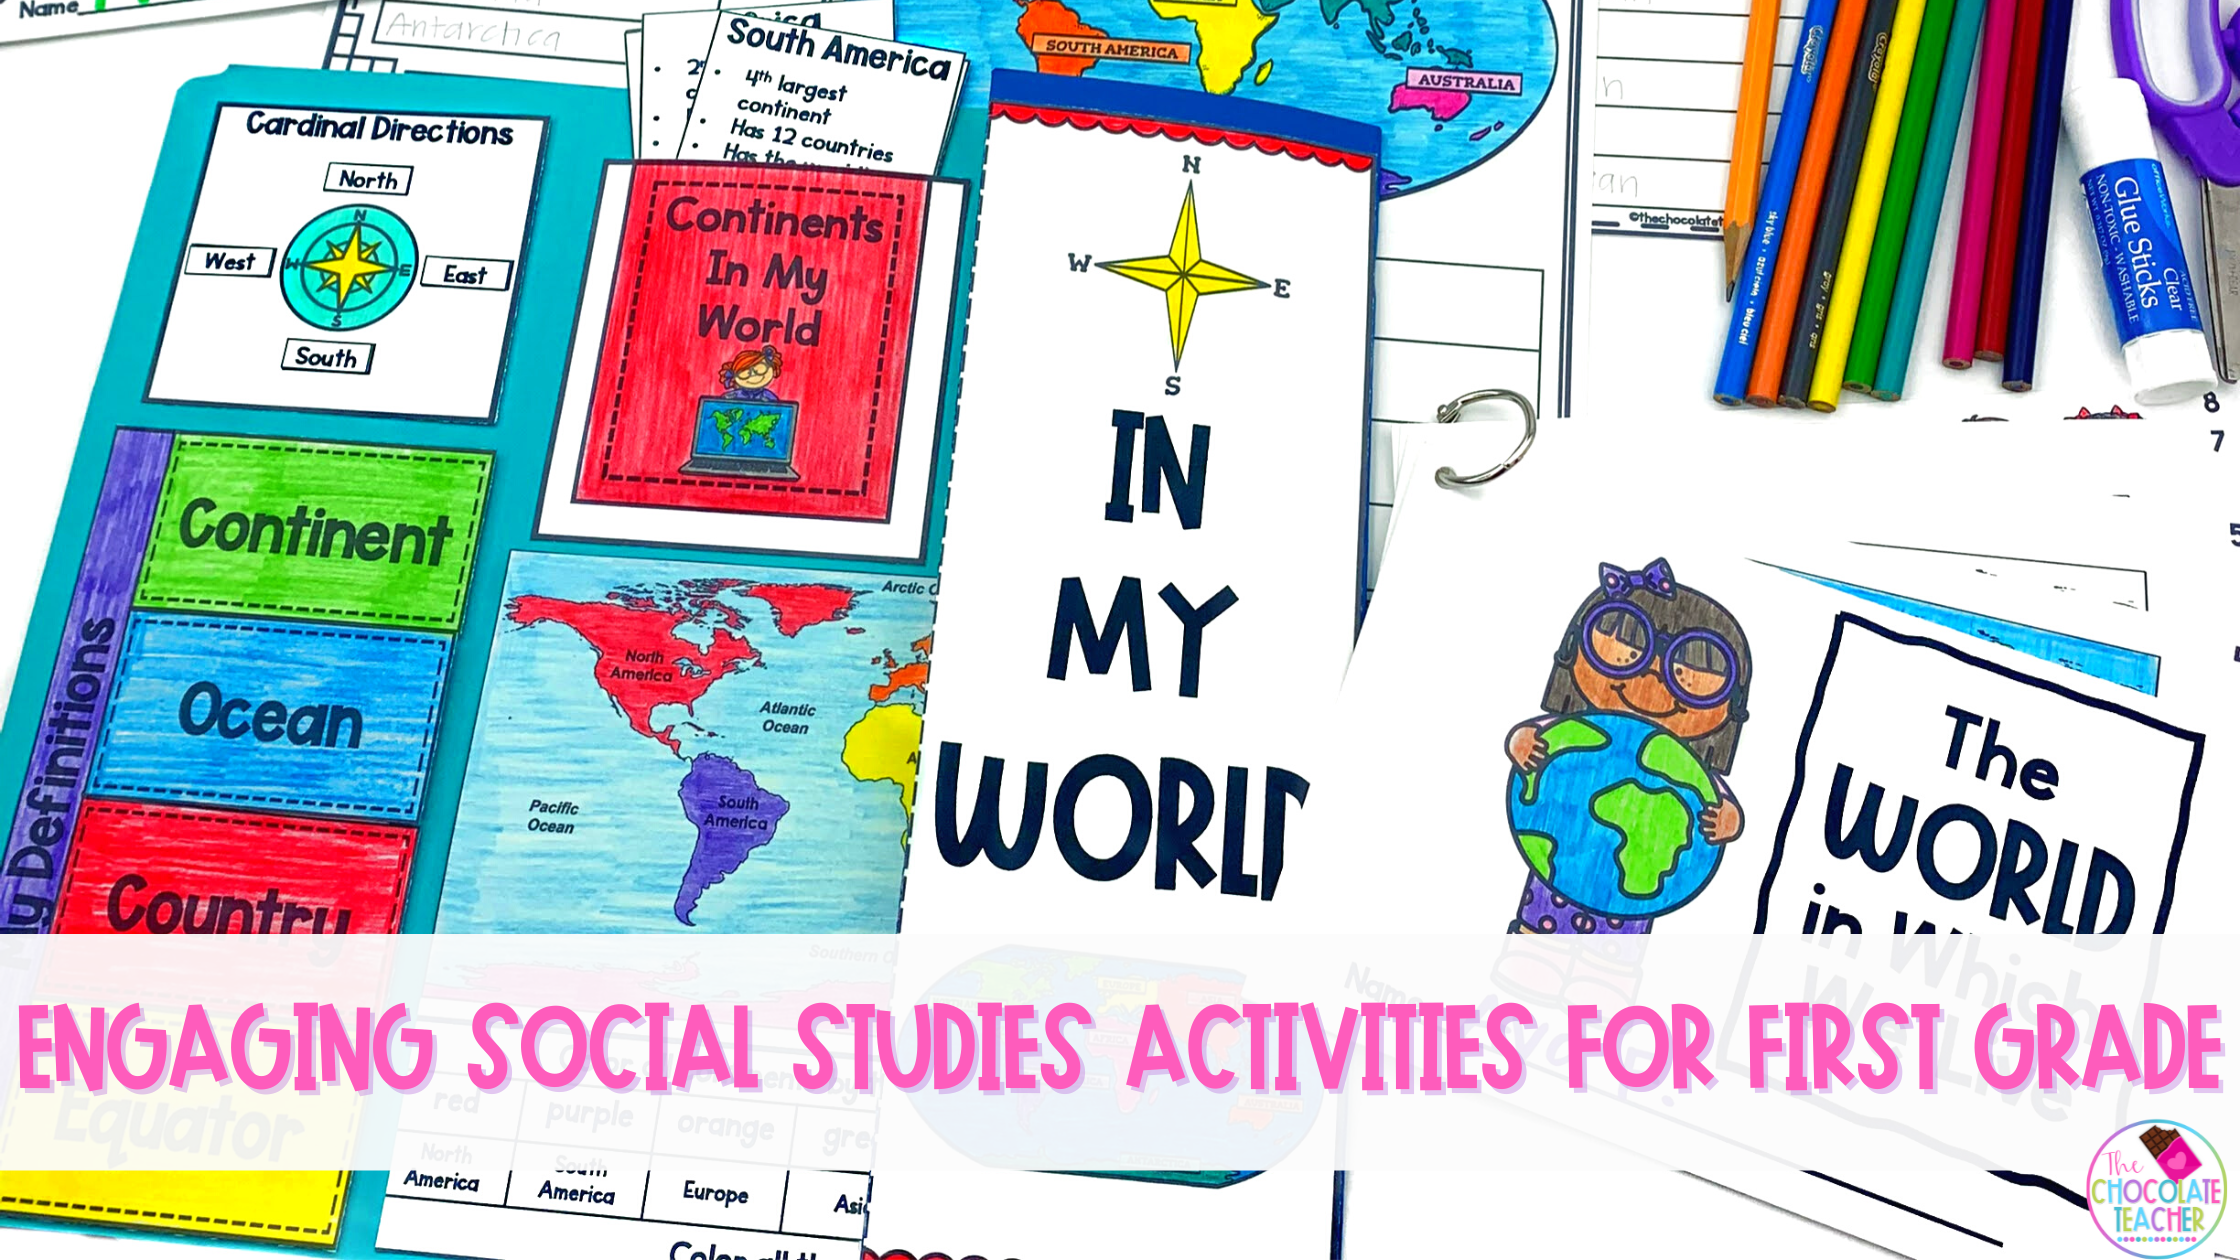 Cover all of your social studies standards with these creative projects your students will love.